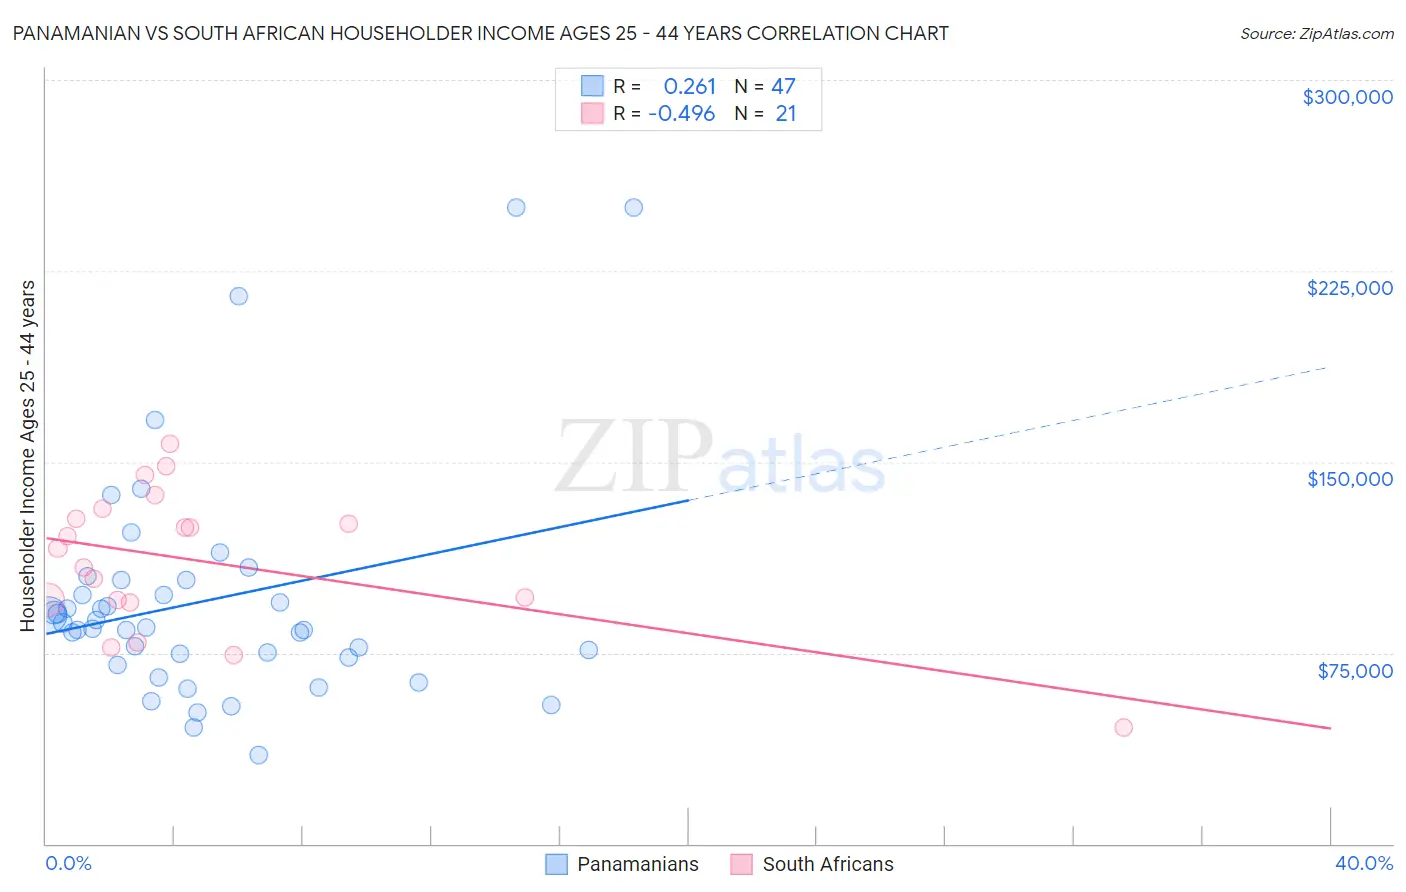 Panamanian vs South African Householder Income Ages 25 - 44 years